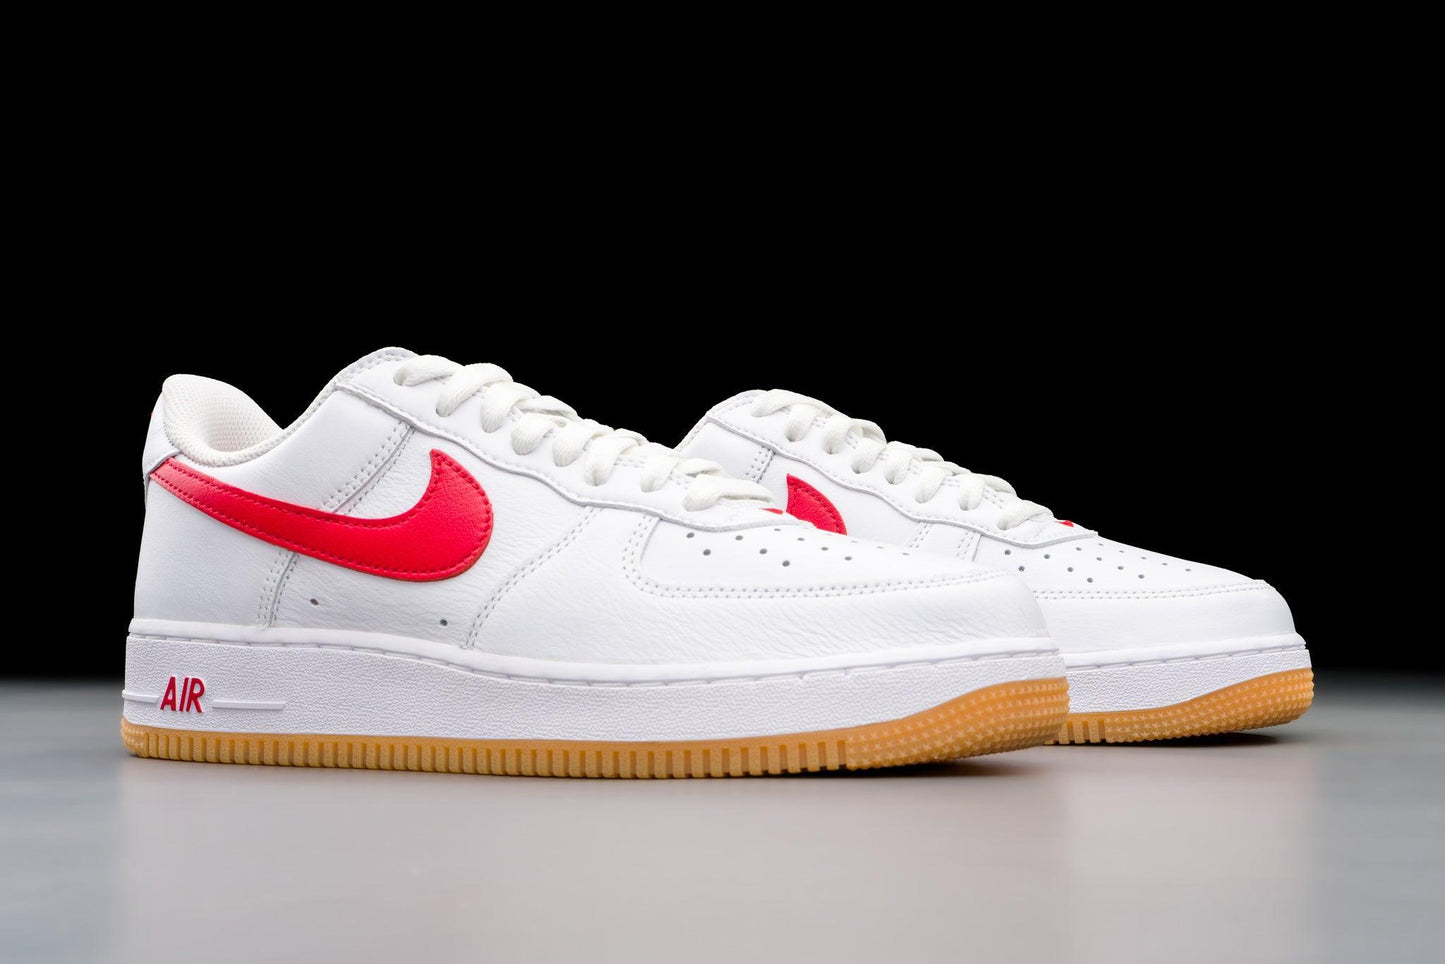 nike air force 1 07 low color of the month university red gum lo10m 3 1445x